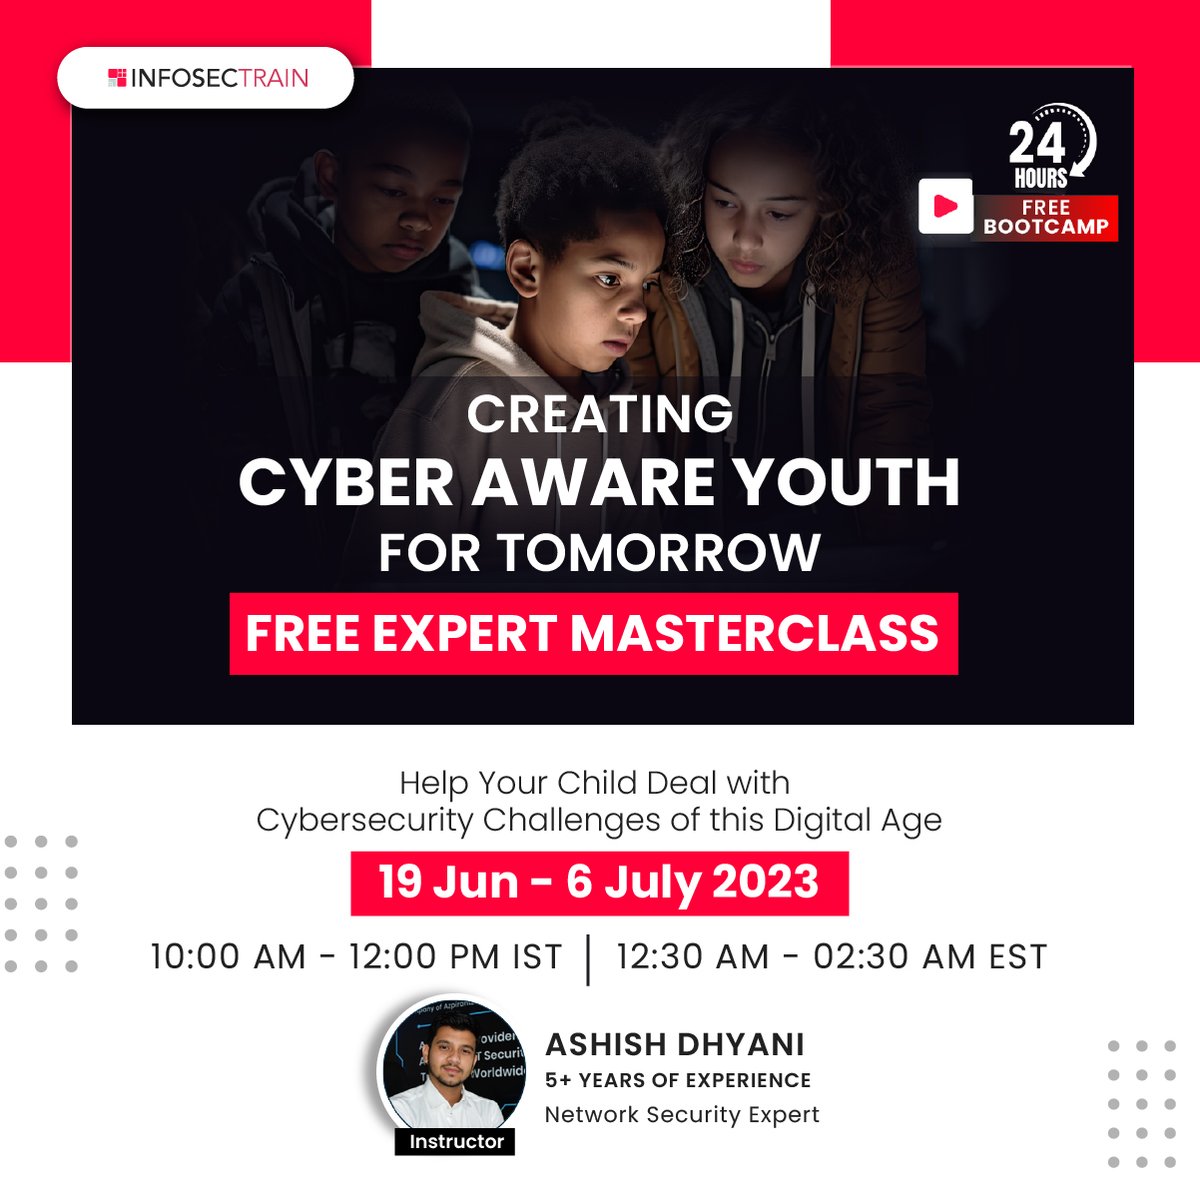 12 Days Workshop : Cyber Awareness Masterclass for Youngsters
Date📆 19 Jun to 06 July (Mon -Thru)  Time ⏰10:00 AM -12:00 PM (IST)
Speaker: Ashish

Register Now: buff.ly/3WKoLCa 

#cybersecurity #cyberawarness #becyberaware #infosec #infosectrain #learntorise